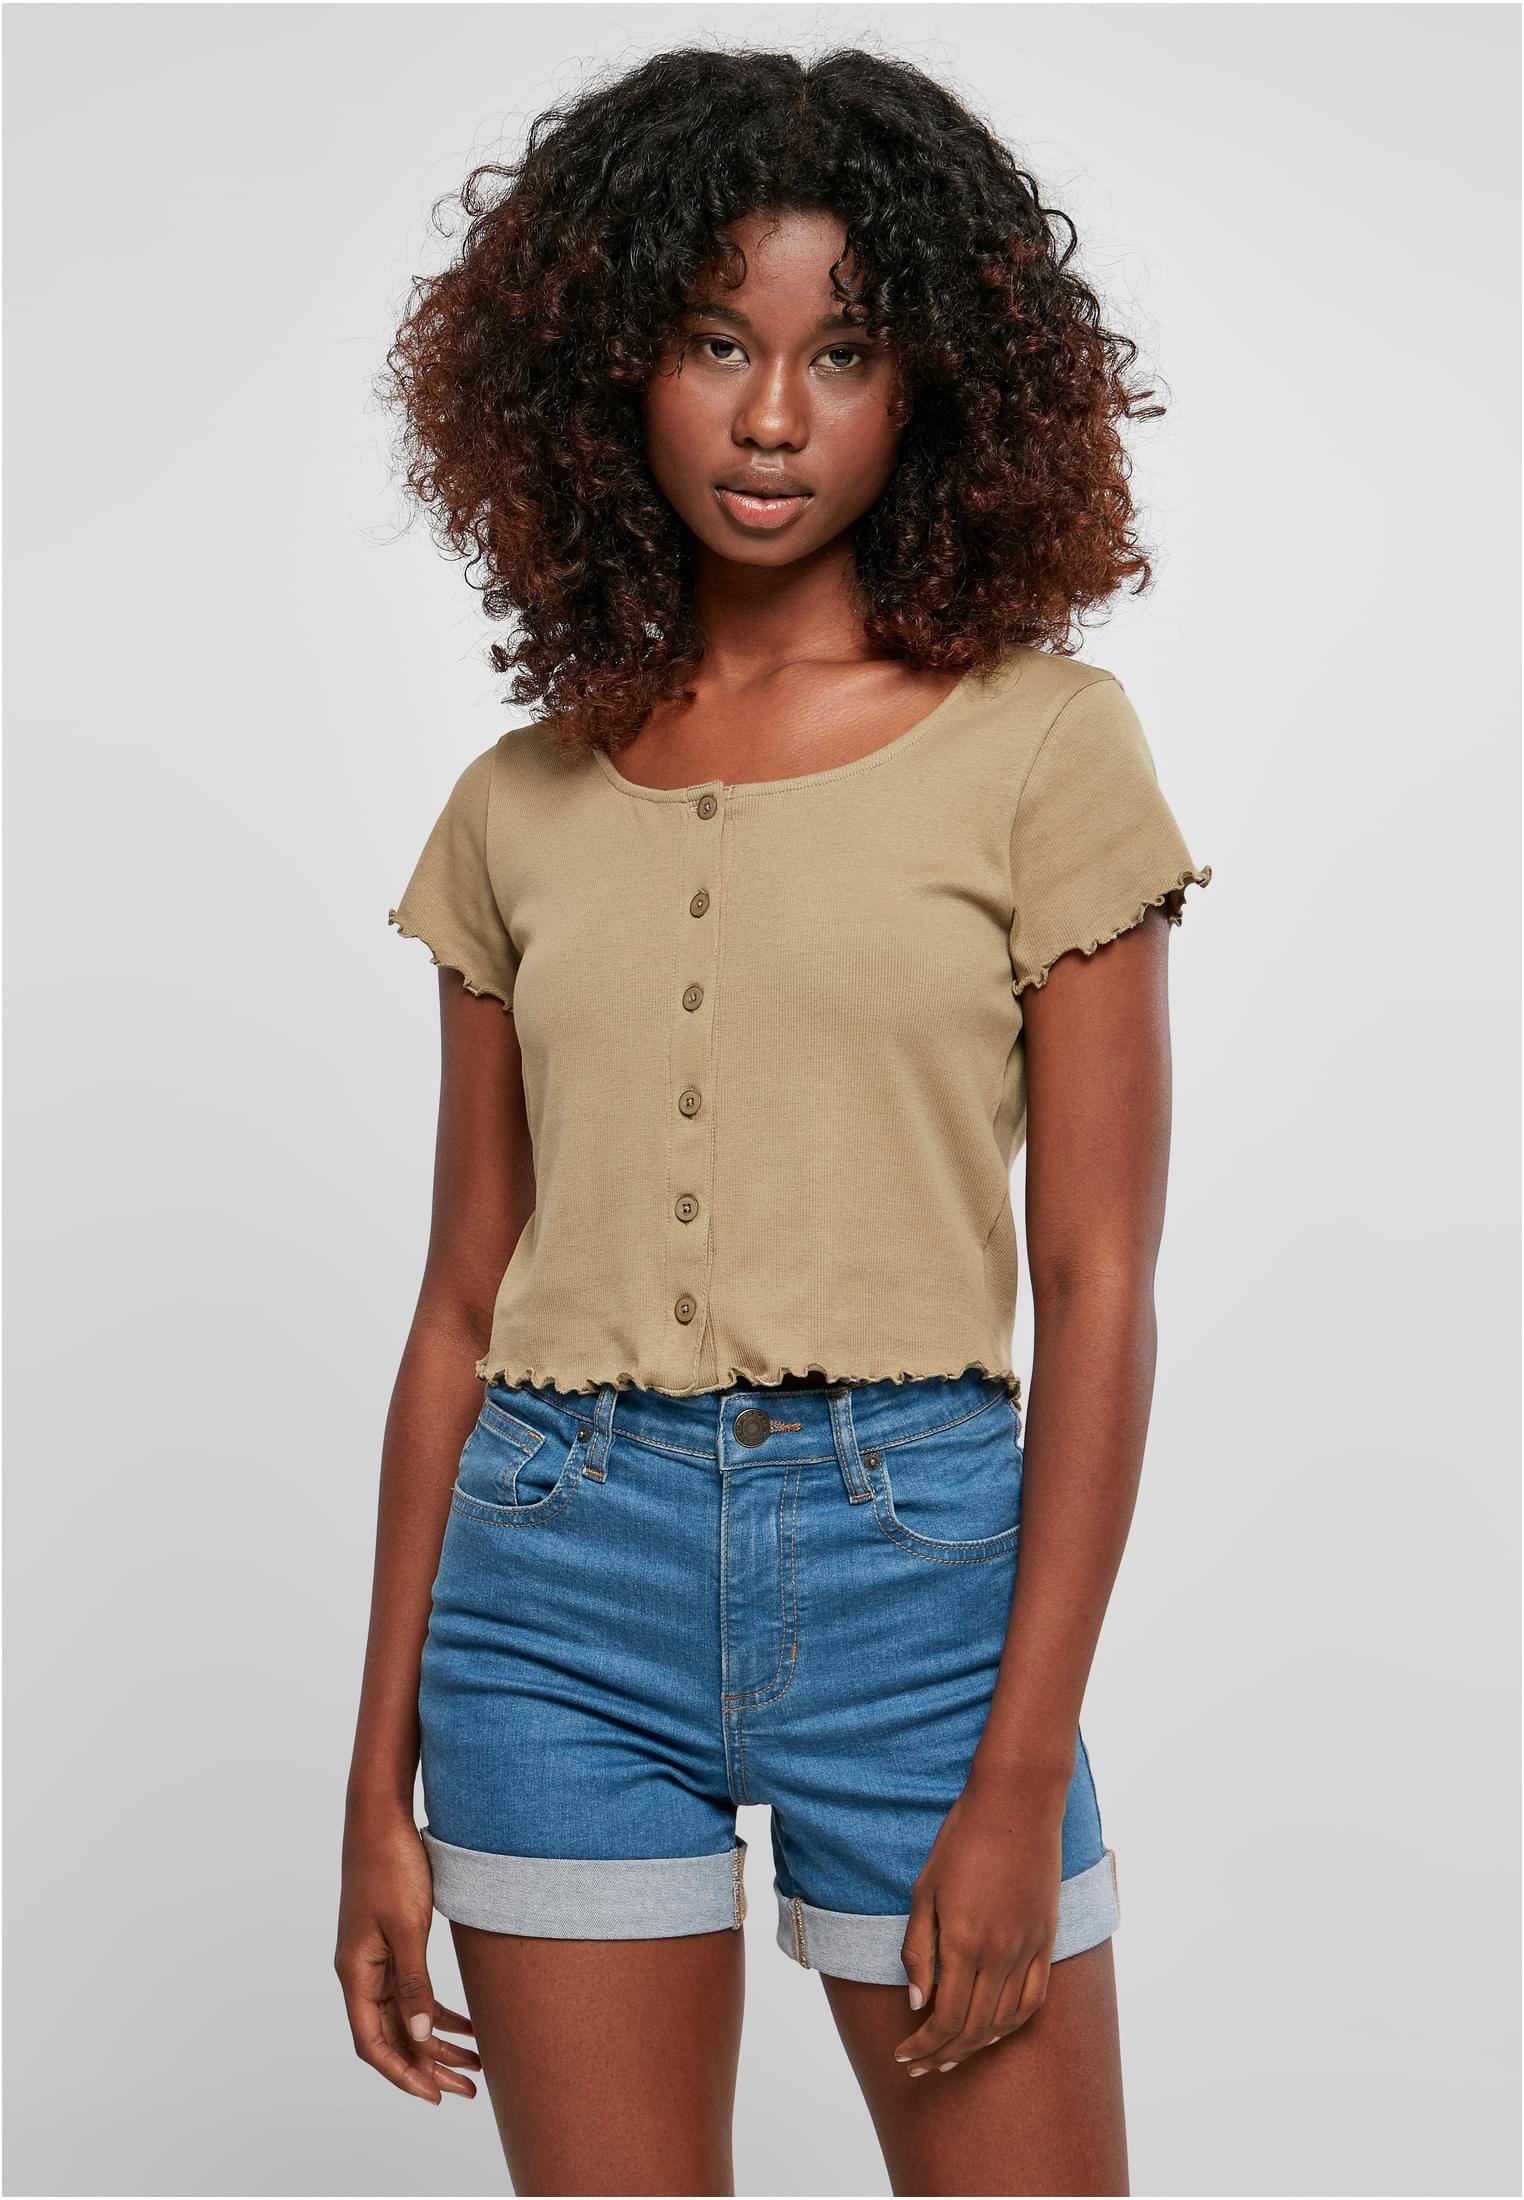 Women's T-shirt In Khaki Color With Button Fastening